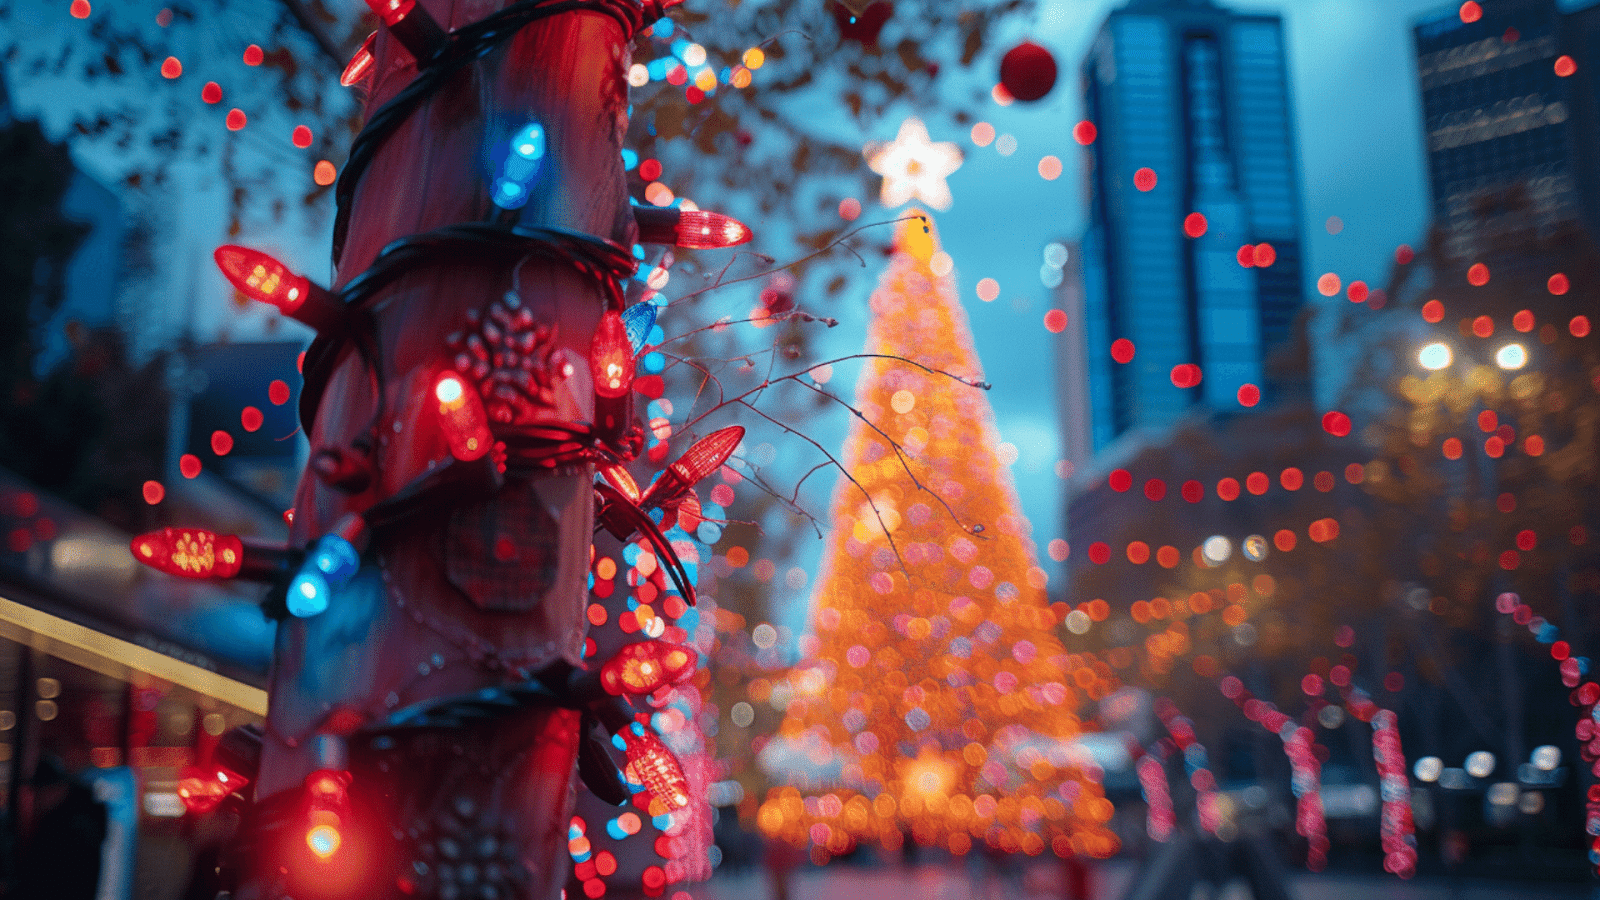 Christmas lights wrapped around a pole with a blurred background featuring a lit-up Christmas tree and city lights